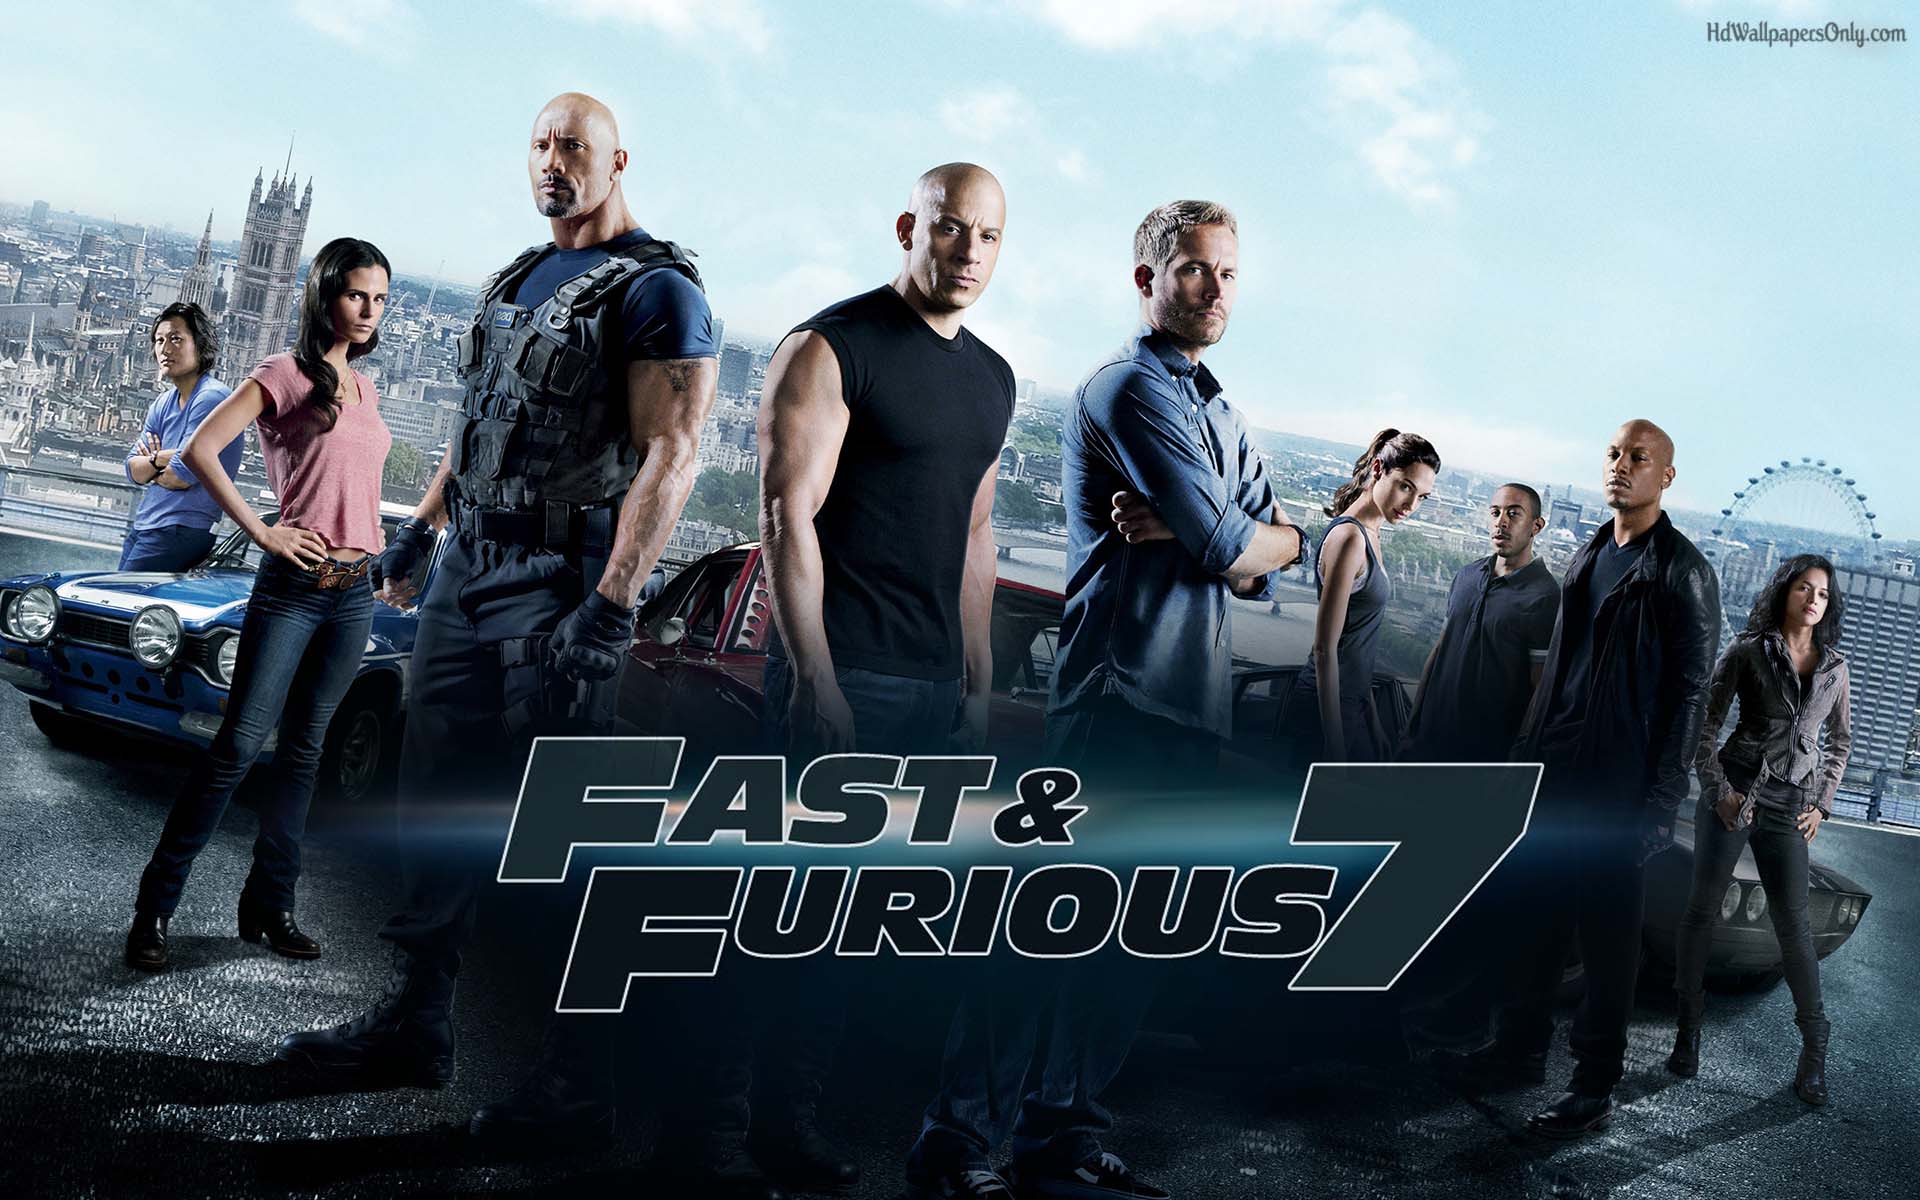 Furious 7 Cars WallpapersBest Of The Best High Definition Wallpapers